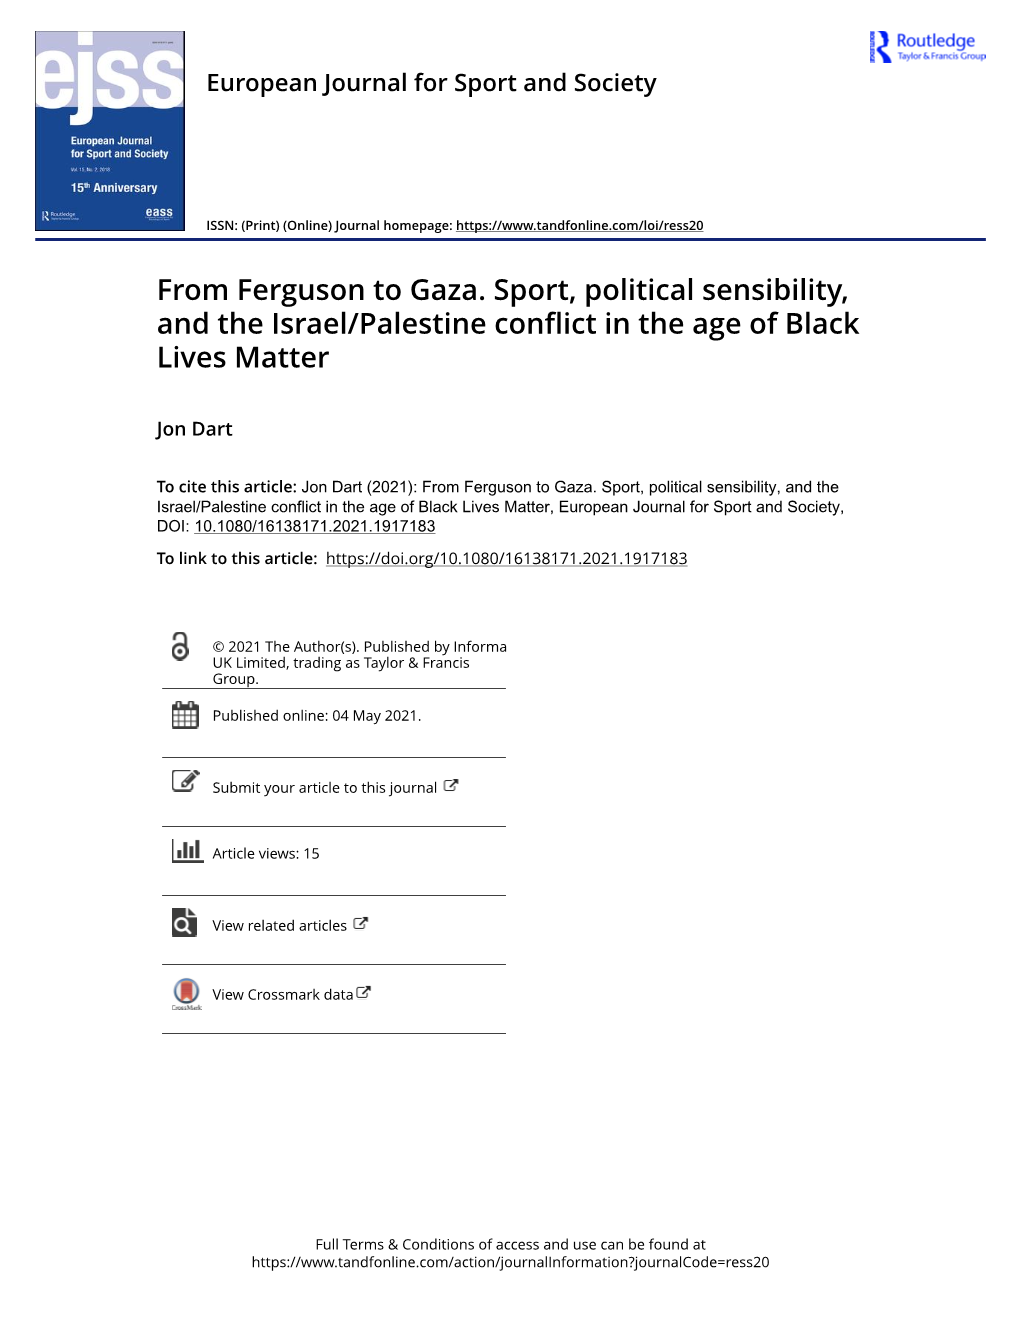 From Ferguson to Gaza. Sport, Political Sensibility, and the Israel/Palestine Conflict in the Age of Black Lives Matter